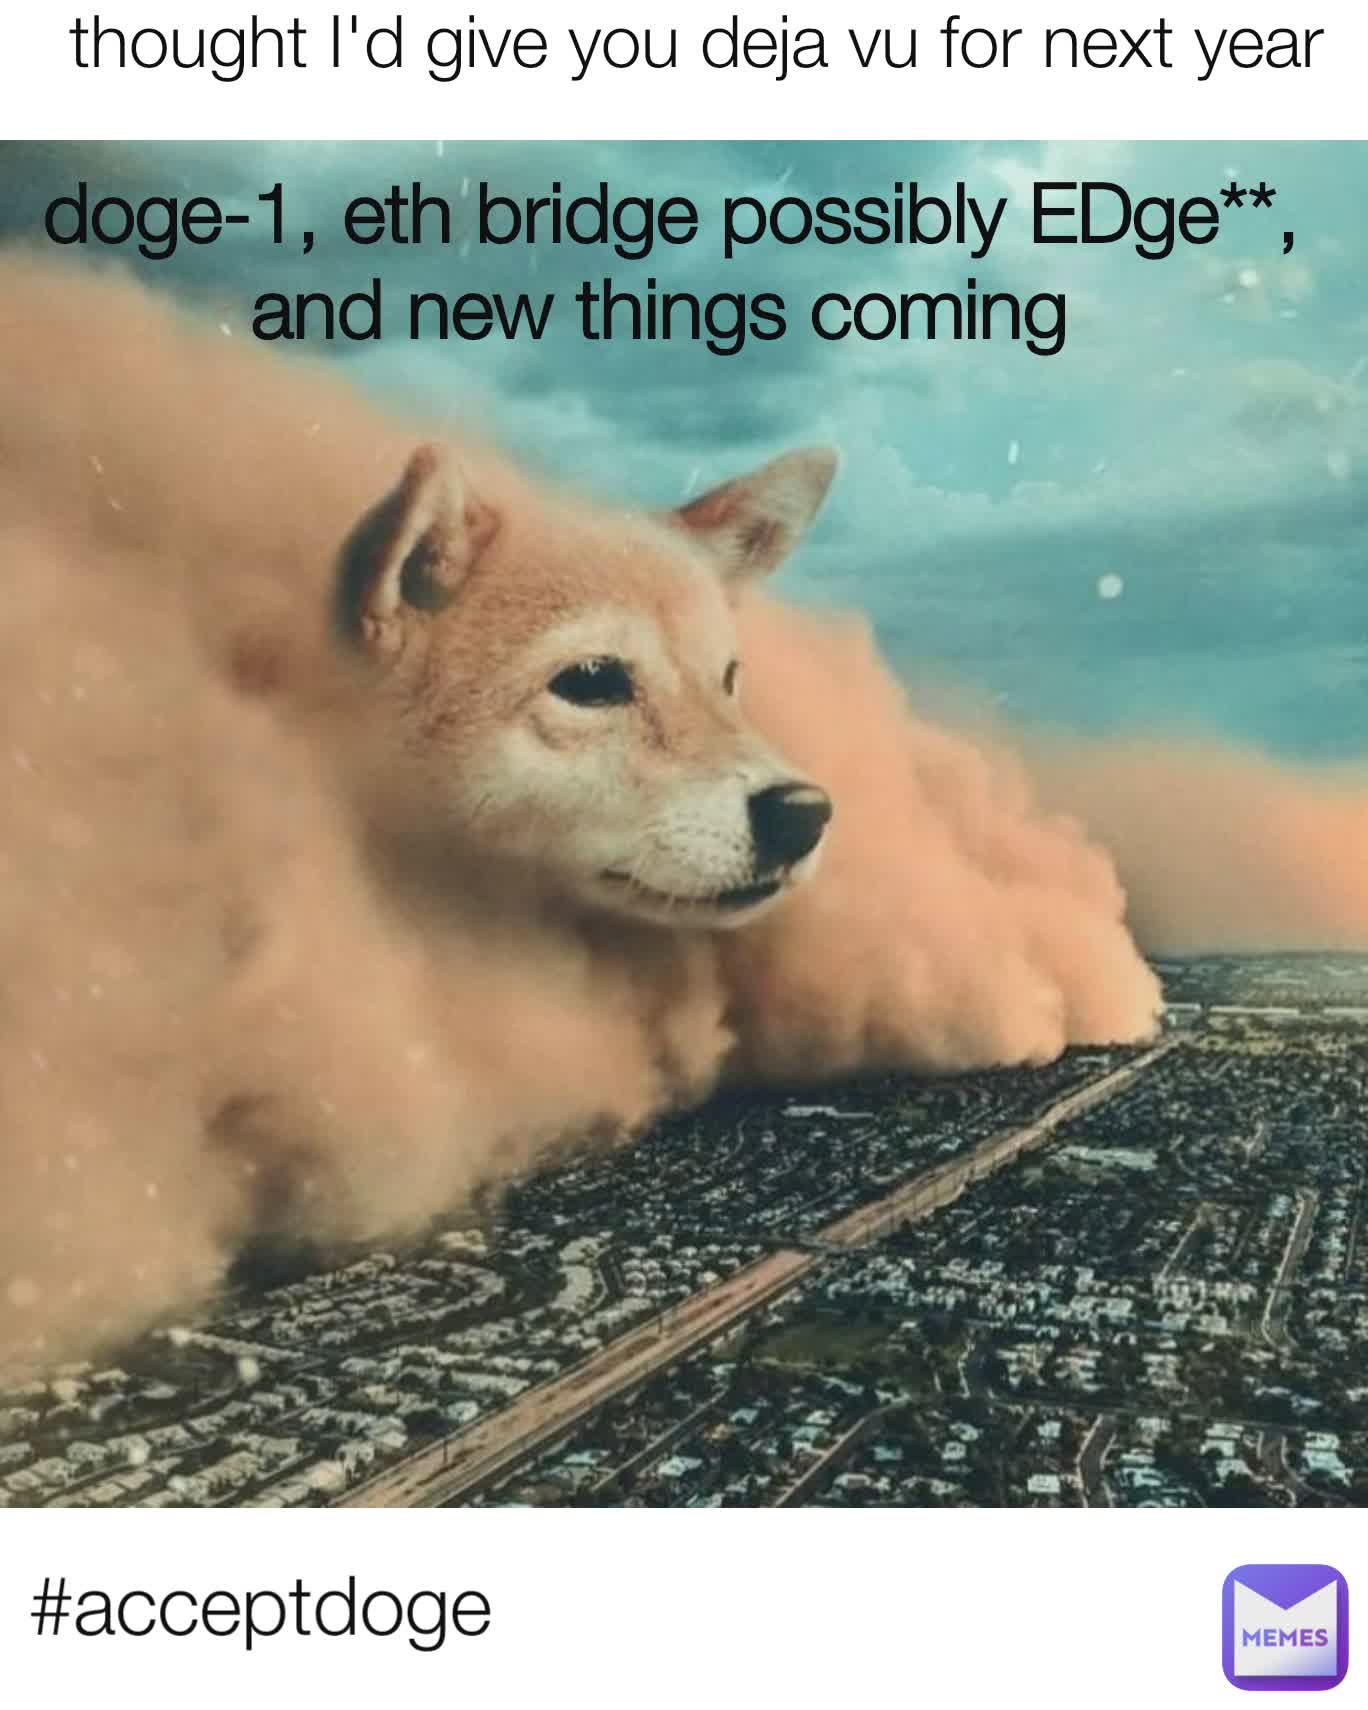 doge-1, eth bridge possibly EDge**, and new things coming  #acceptdoge thought I'd give you deja vu for next year